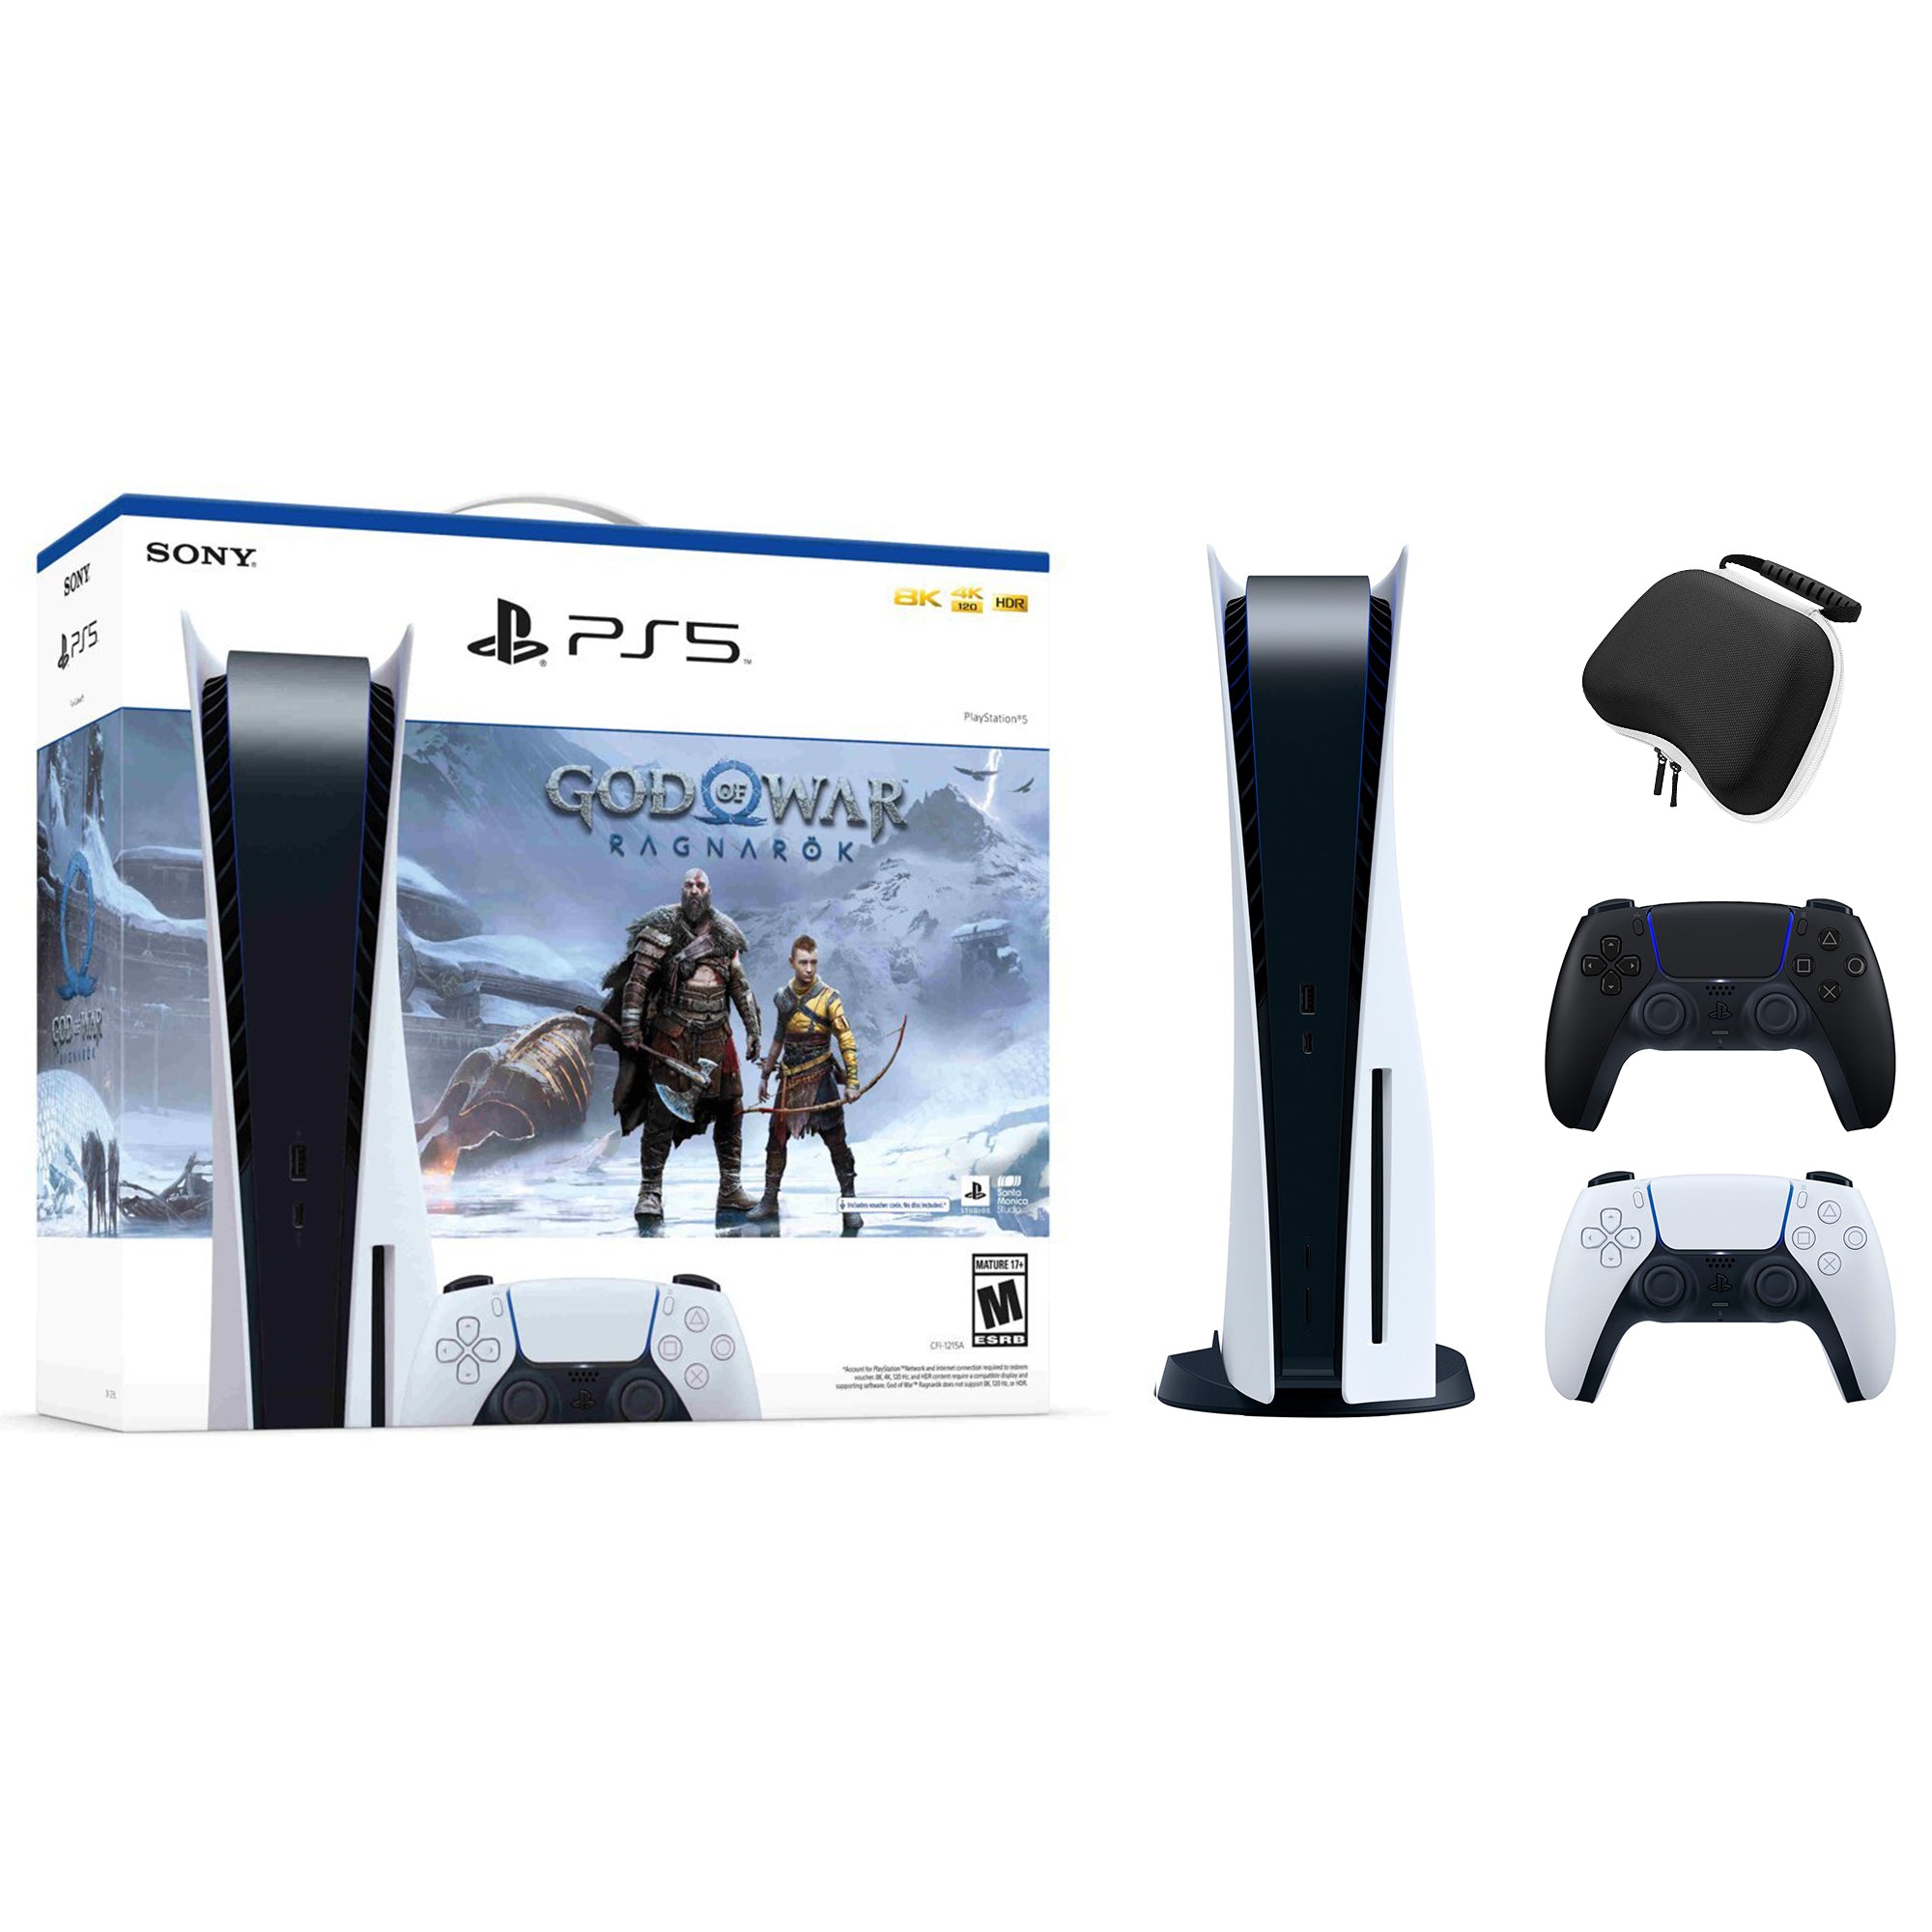 PlayStation 5 Disc Edition God of War Ragnarok Bundle with Two Controllers White and Midnight Black DualSense and Mytrix Hard Shell Protective Controller Case